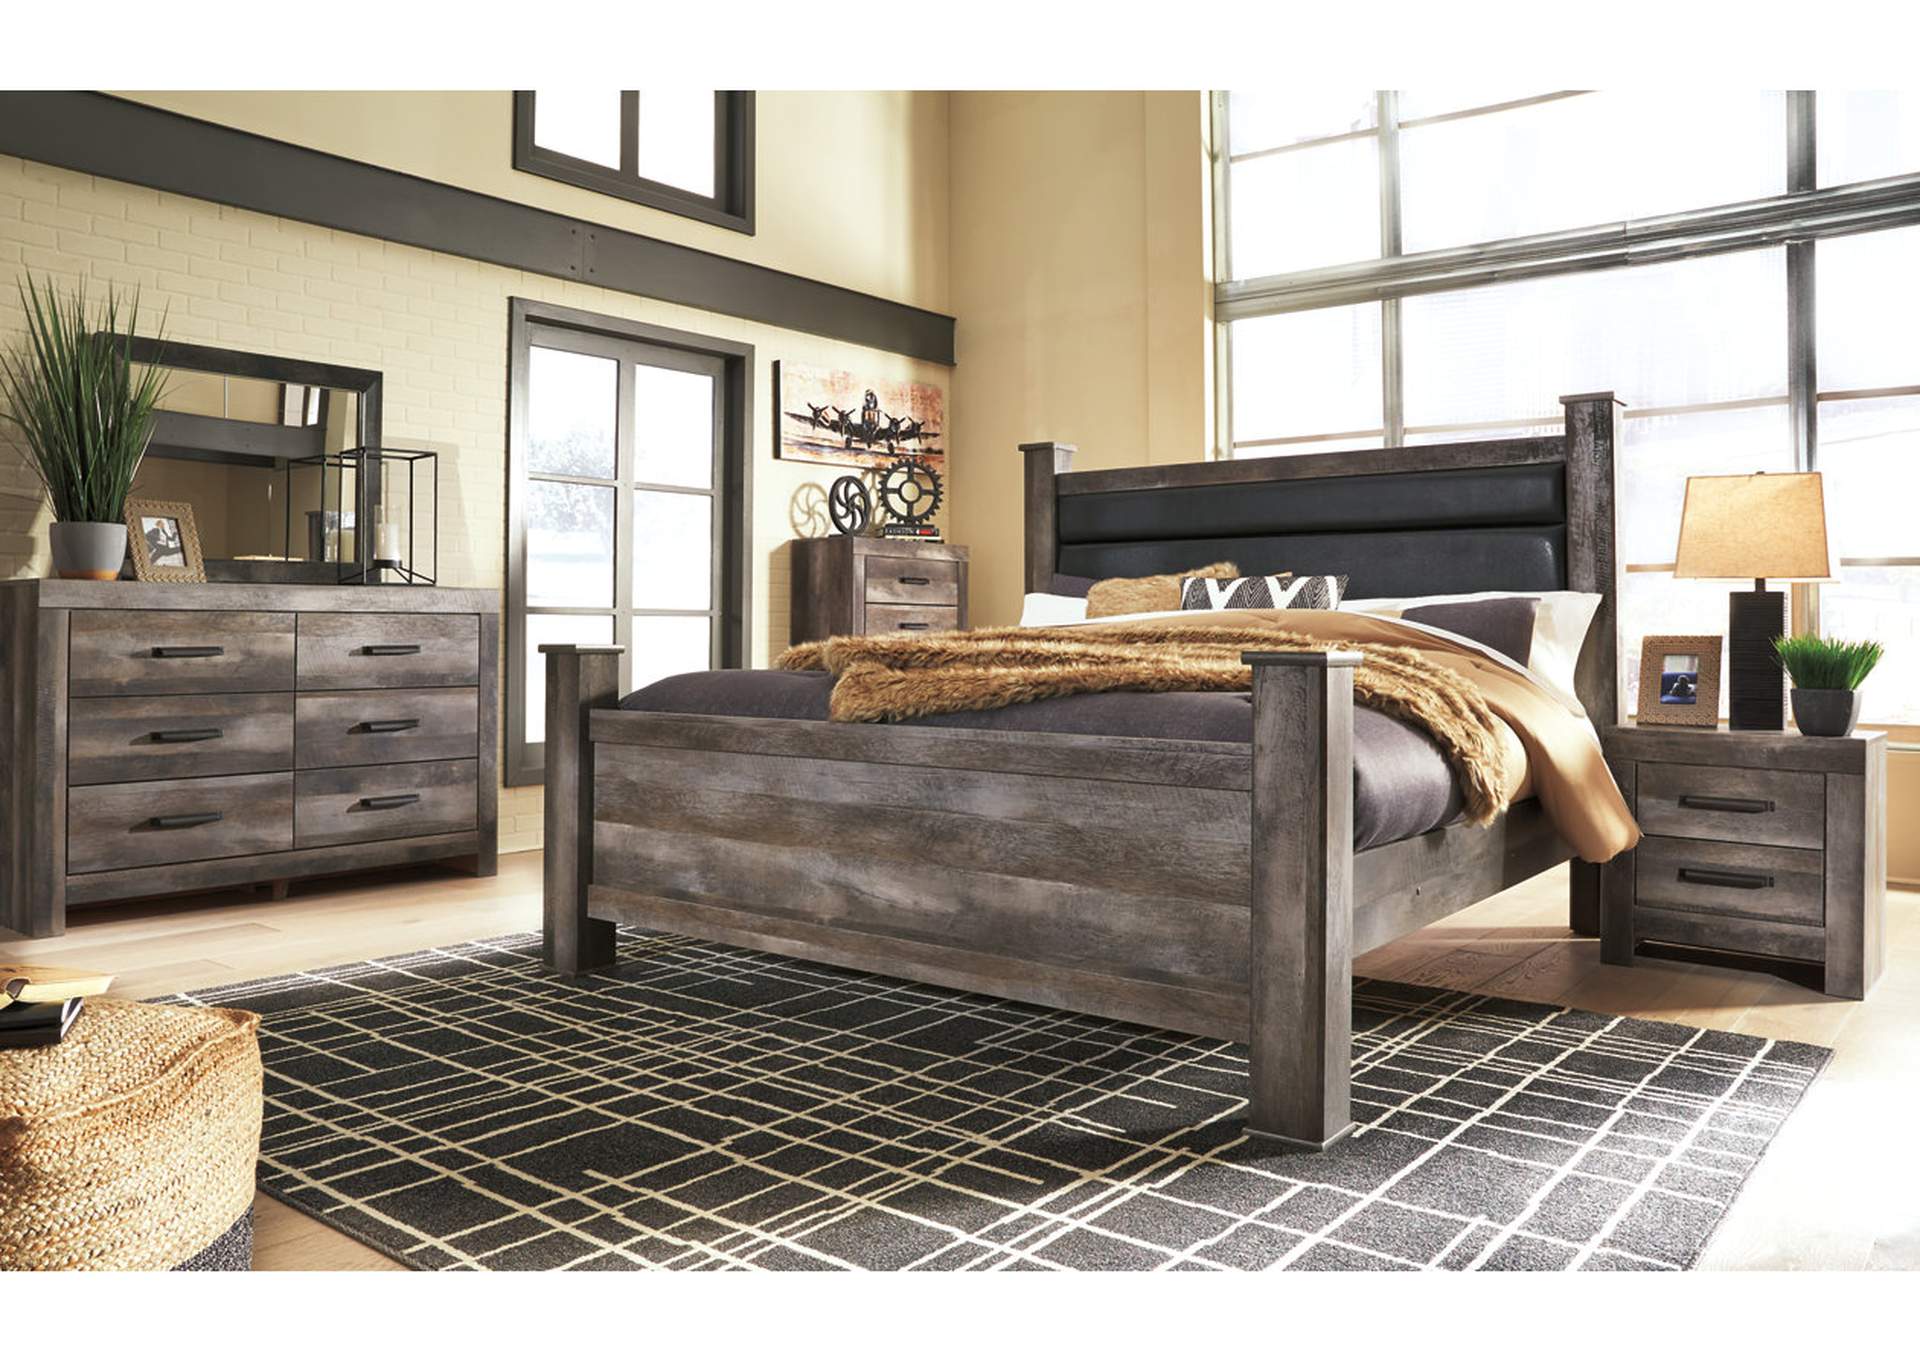 Wynnlow King Poster Bed,Signature Design By Ashley